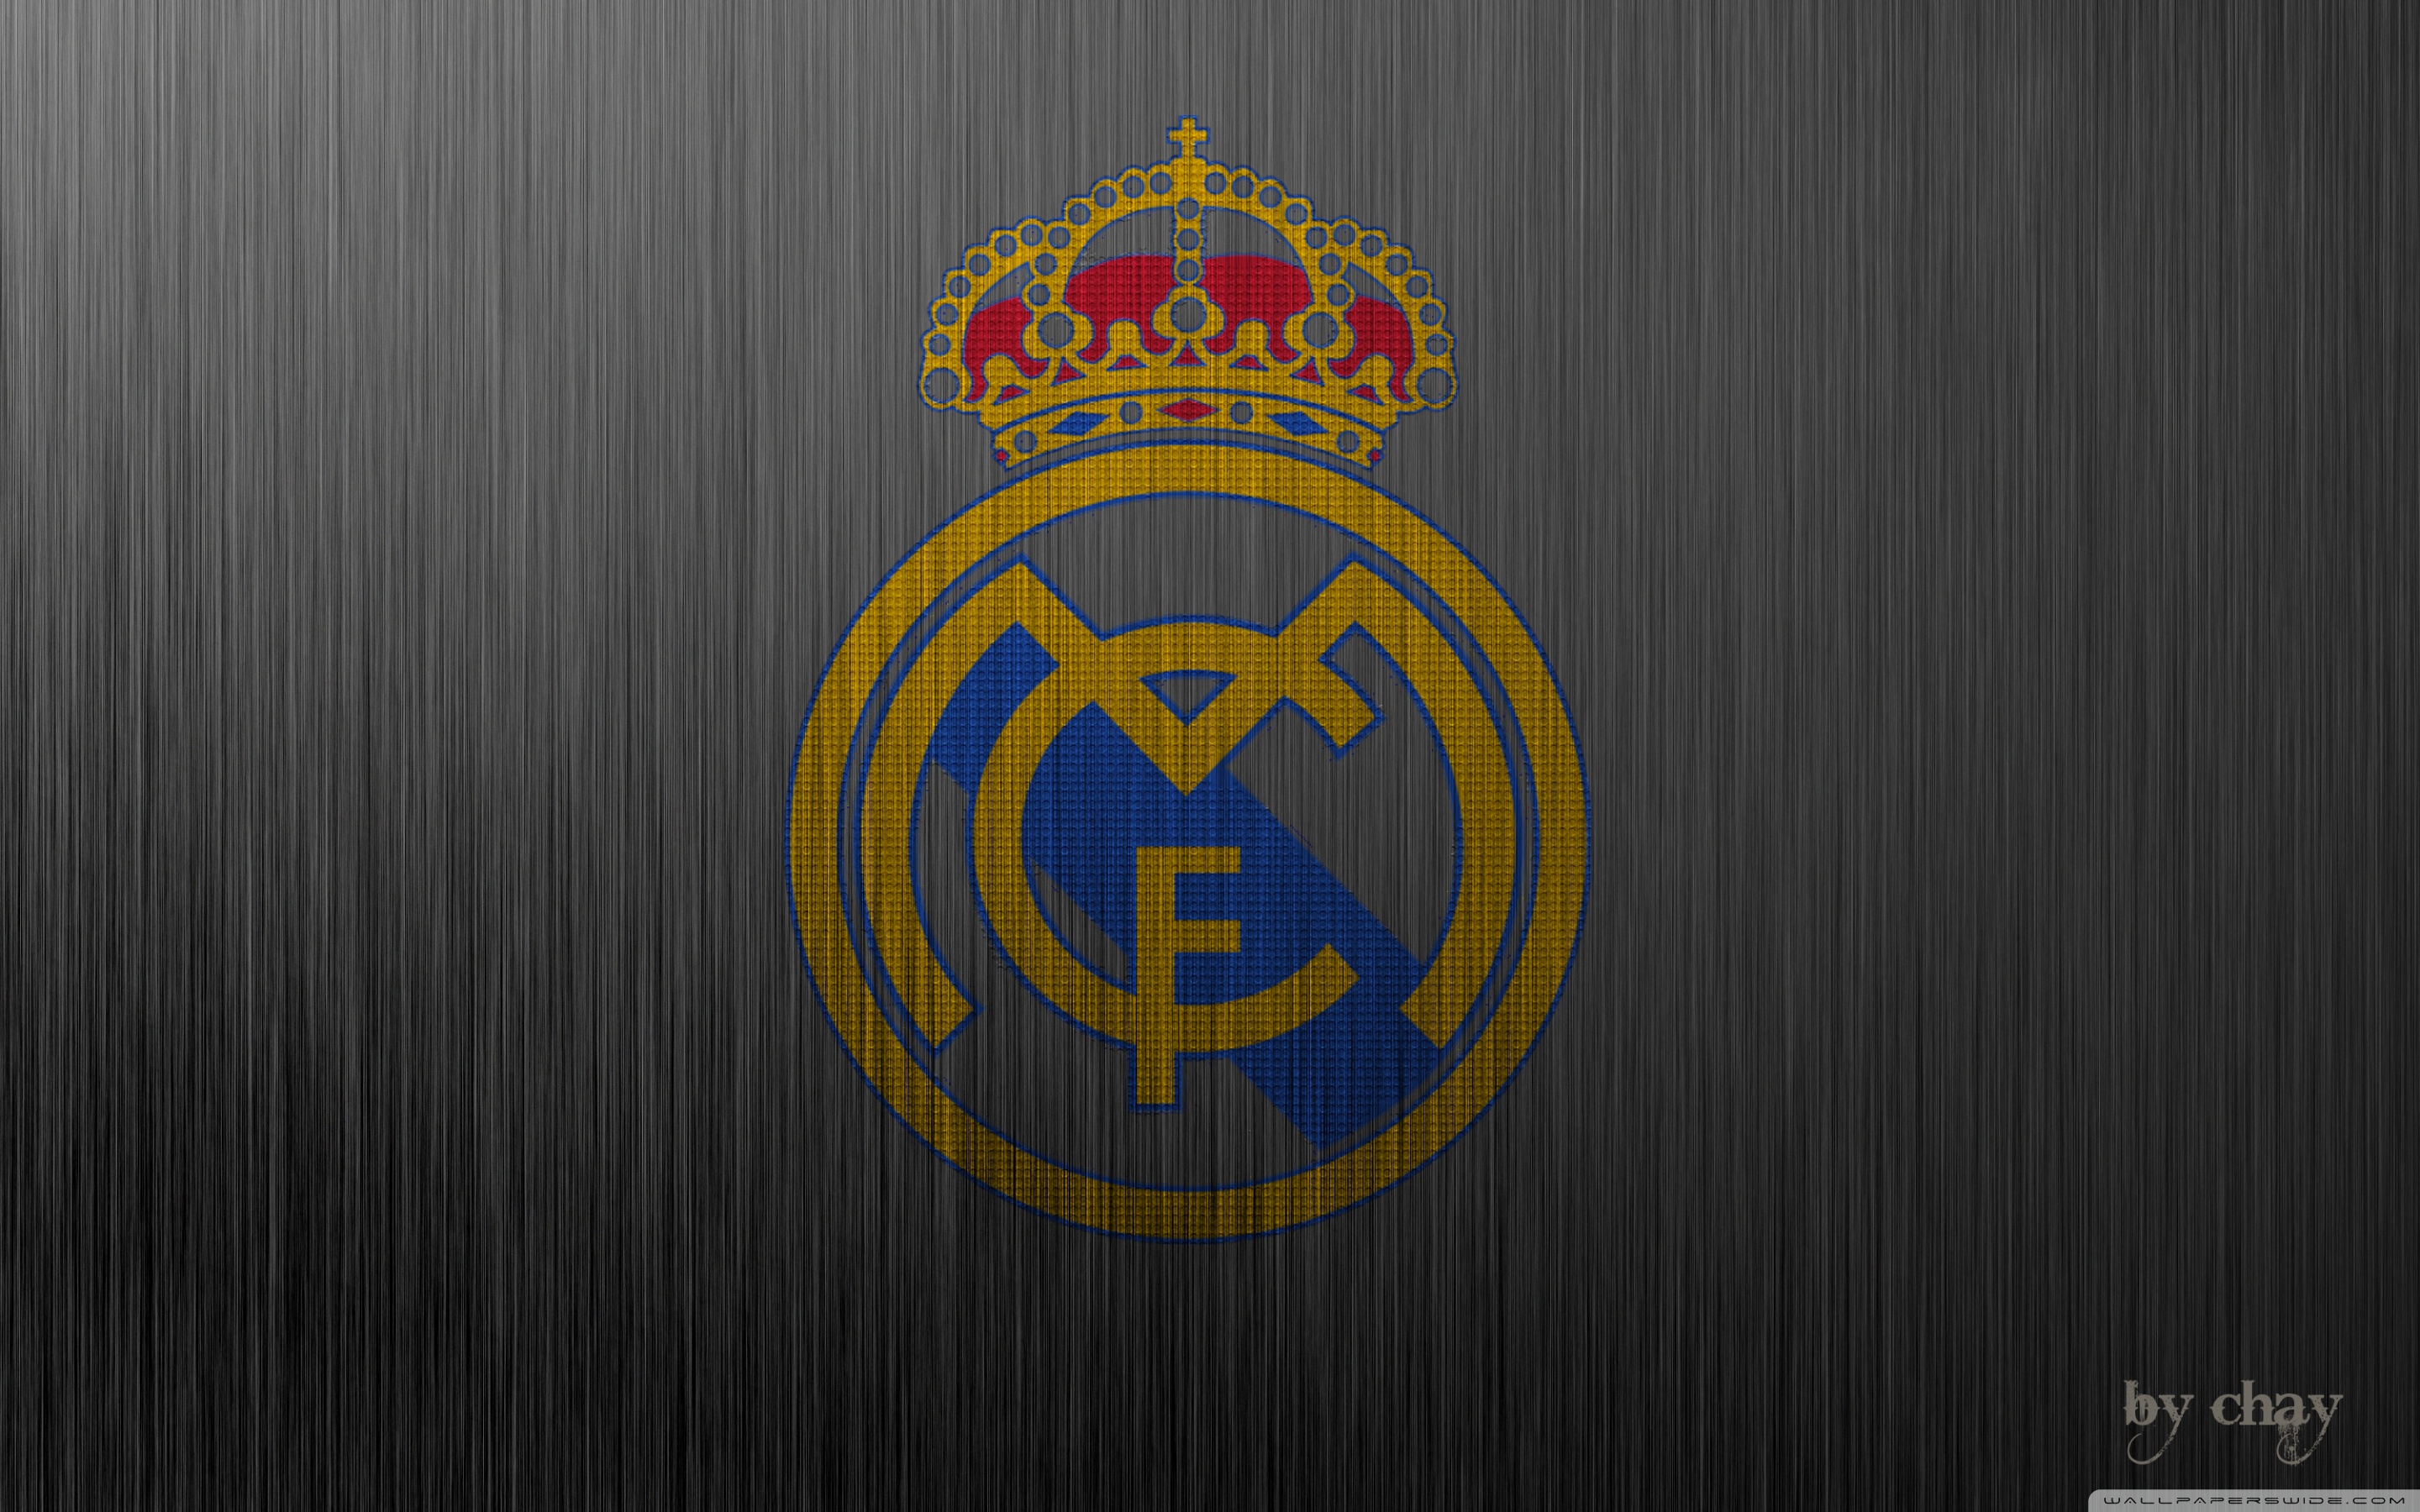 Real Madrid Wallpapers HD Wallpapers Pulse